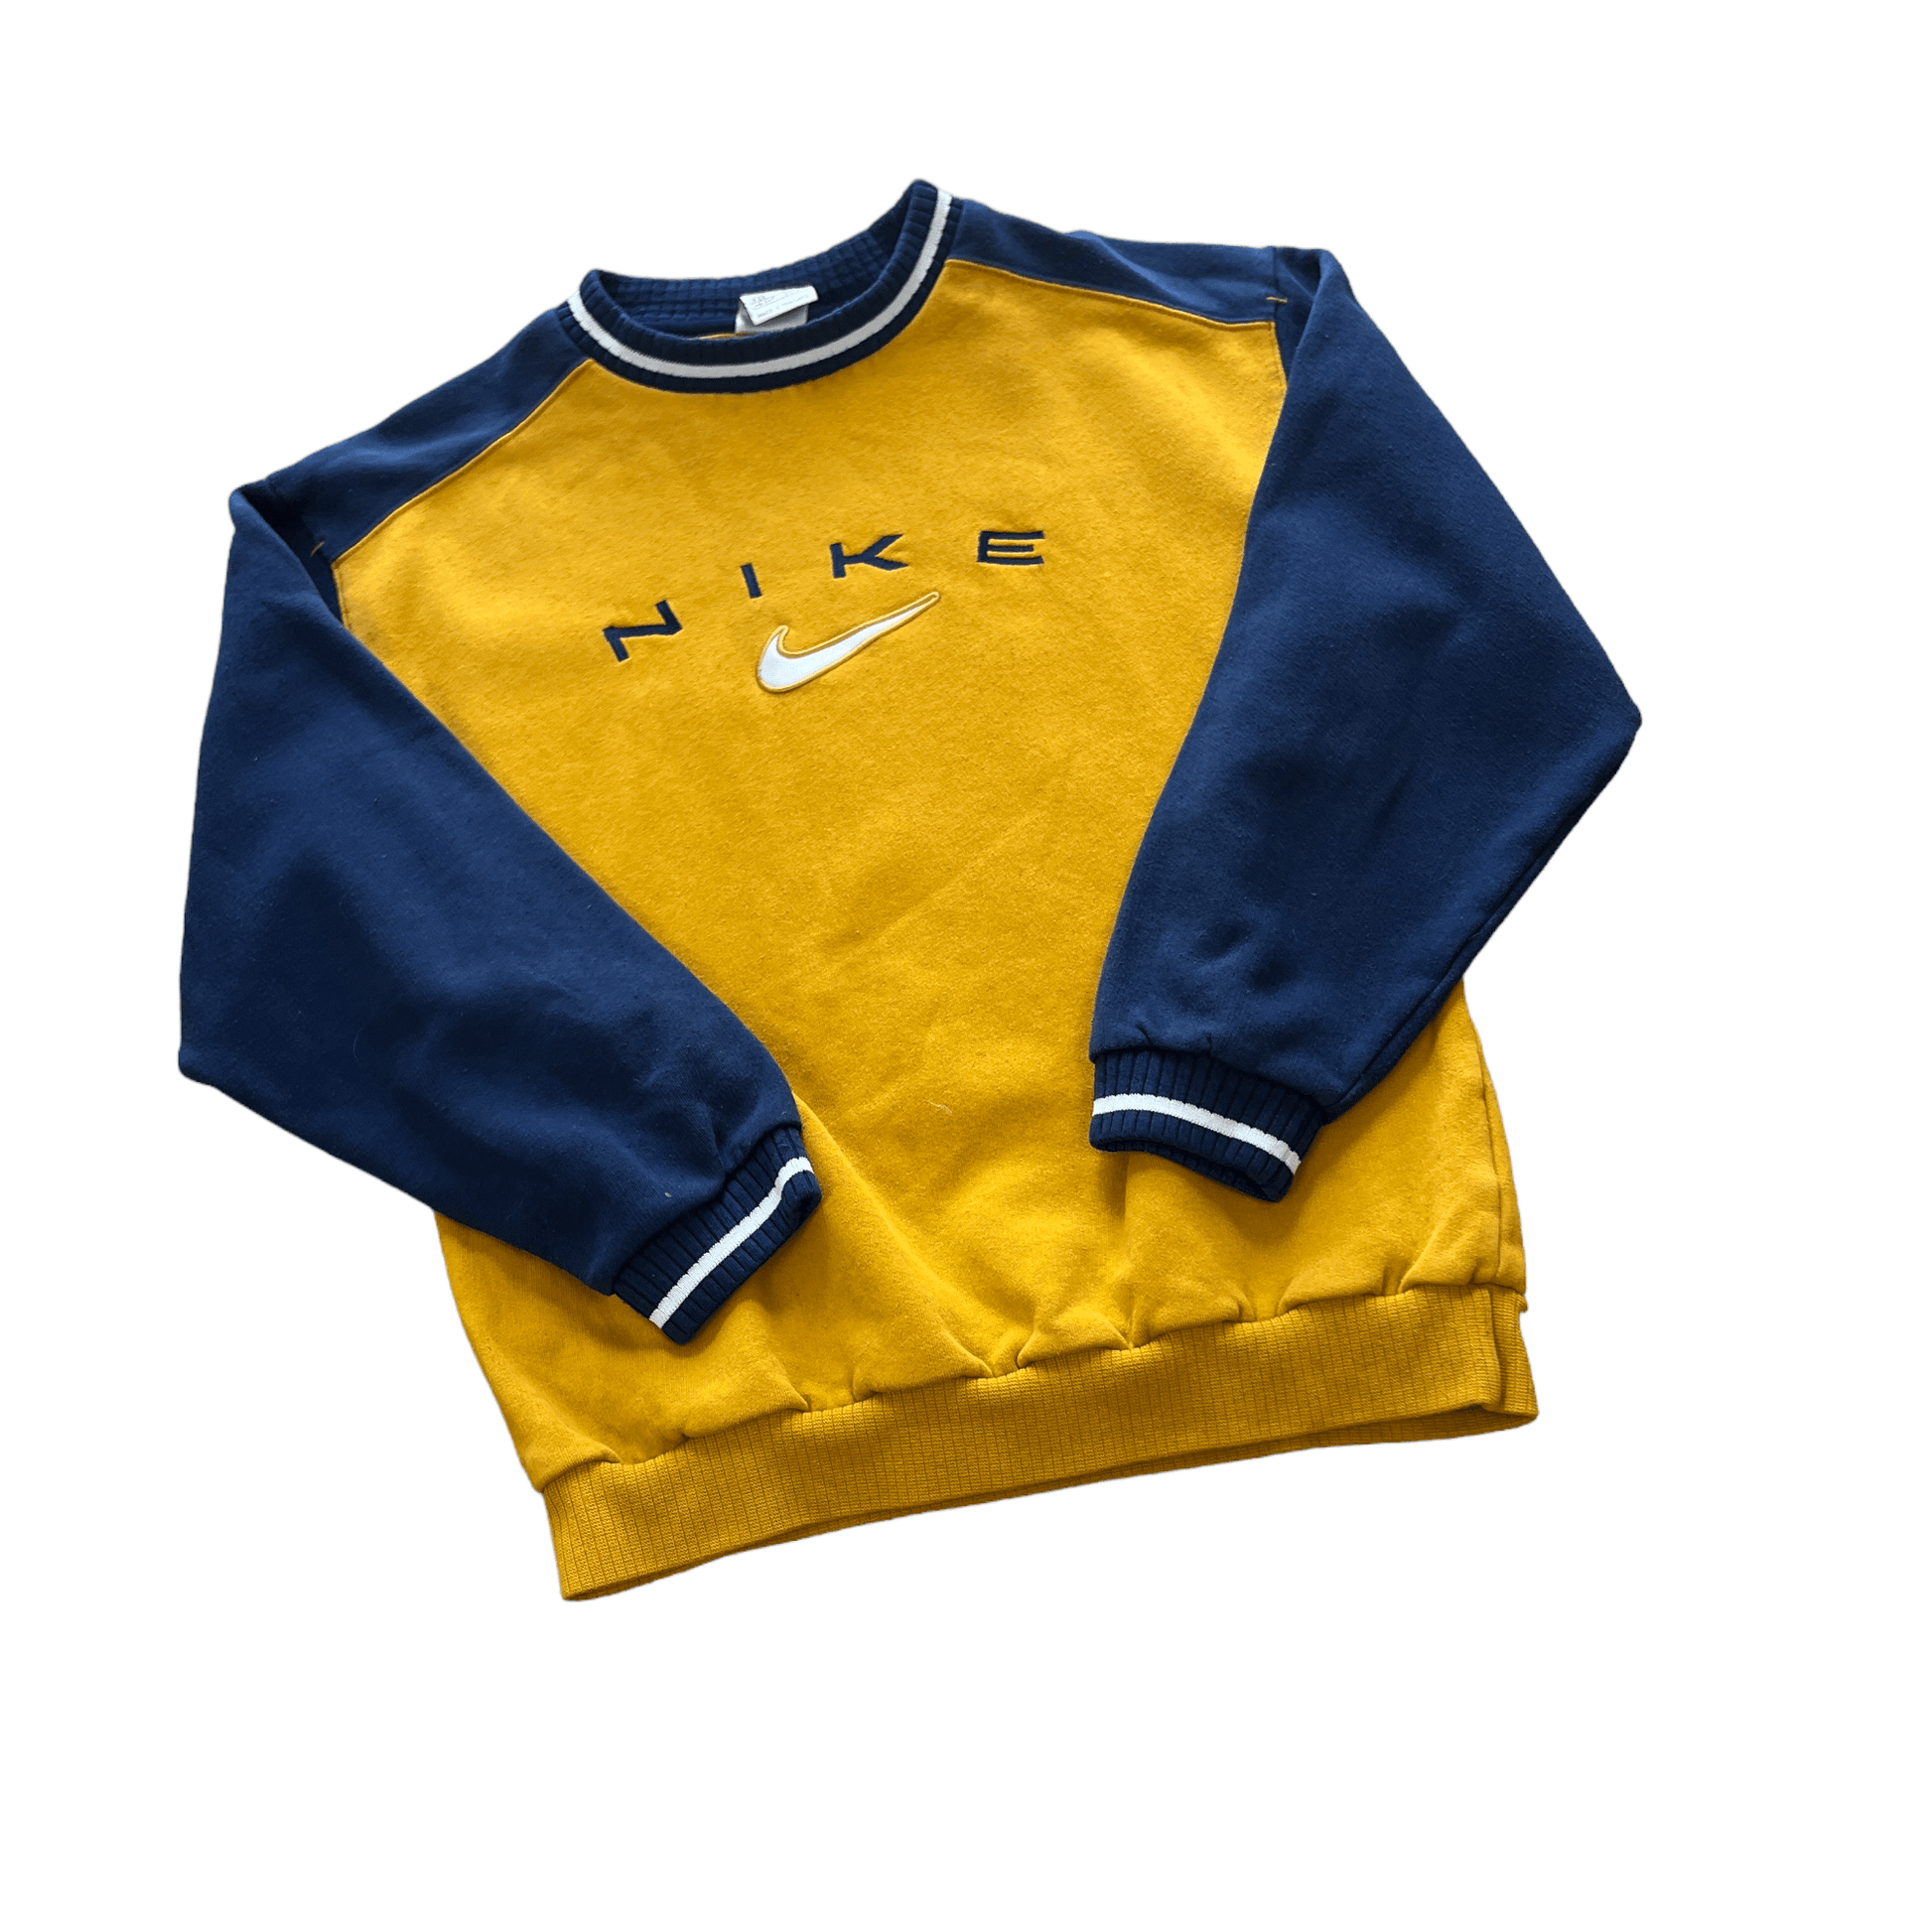 Vintage 90s Navy Blue + Yellow Nike Sweatshirt - Recommended Size - Small - The Streetwear Studio